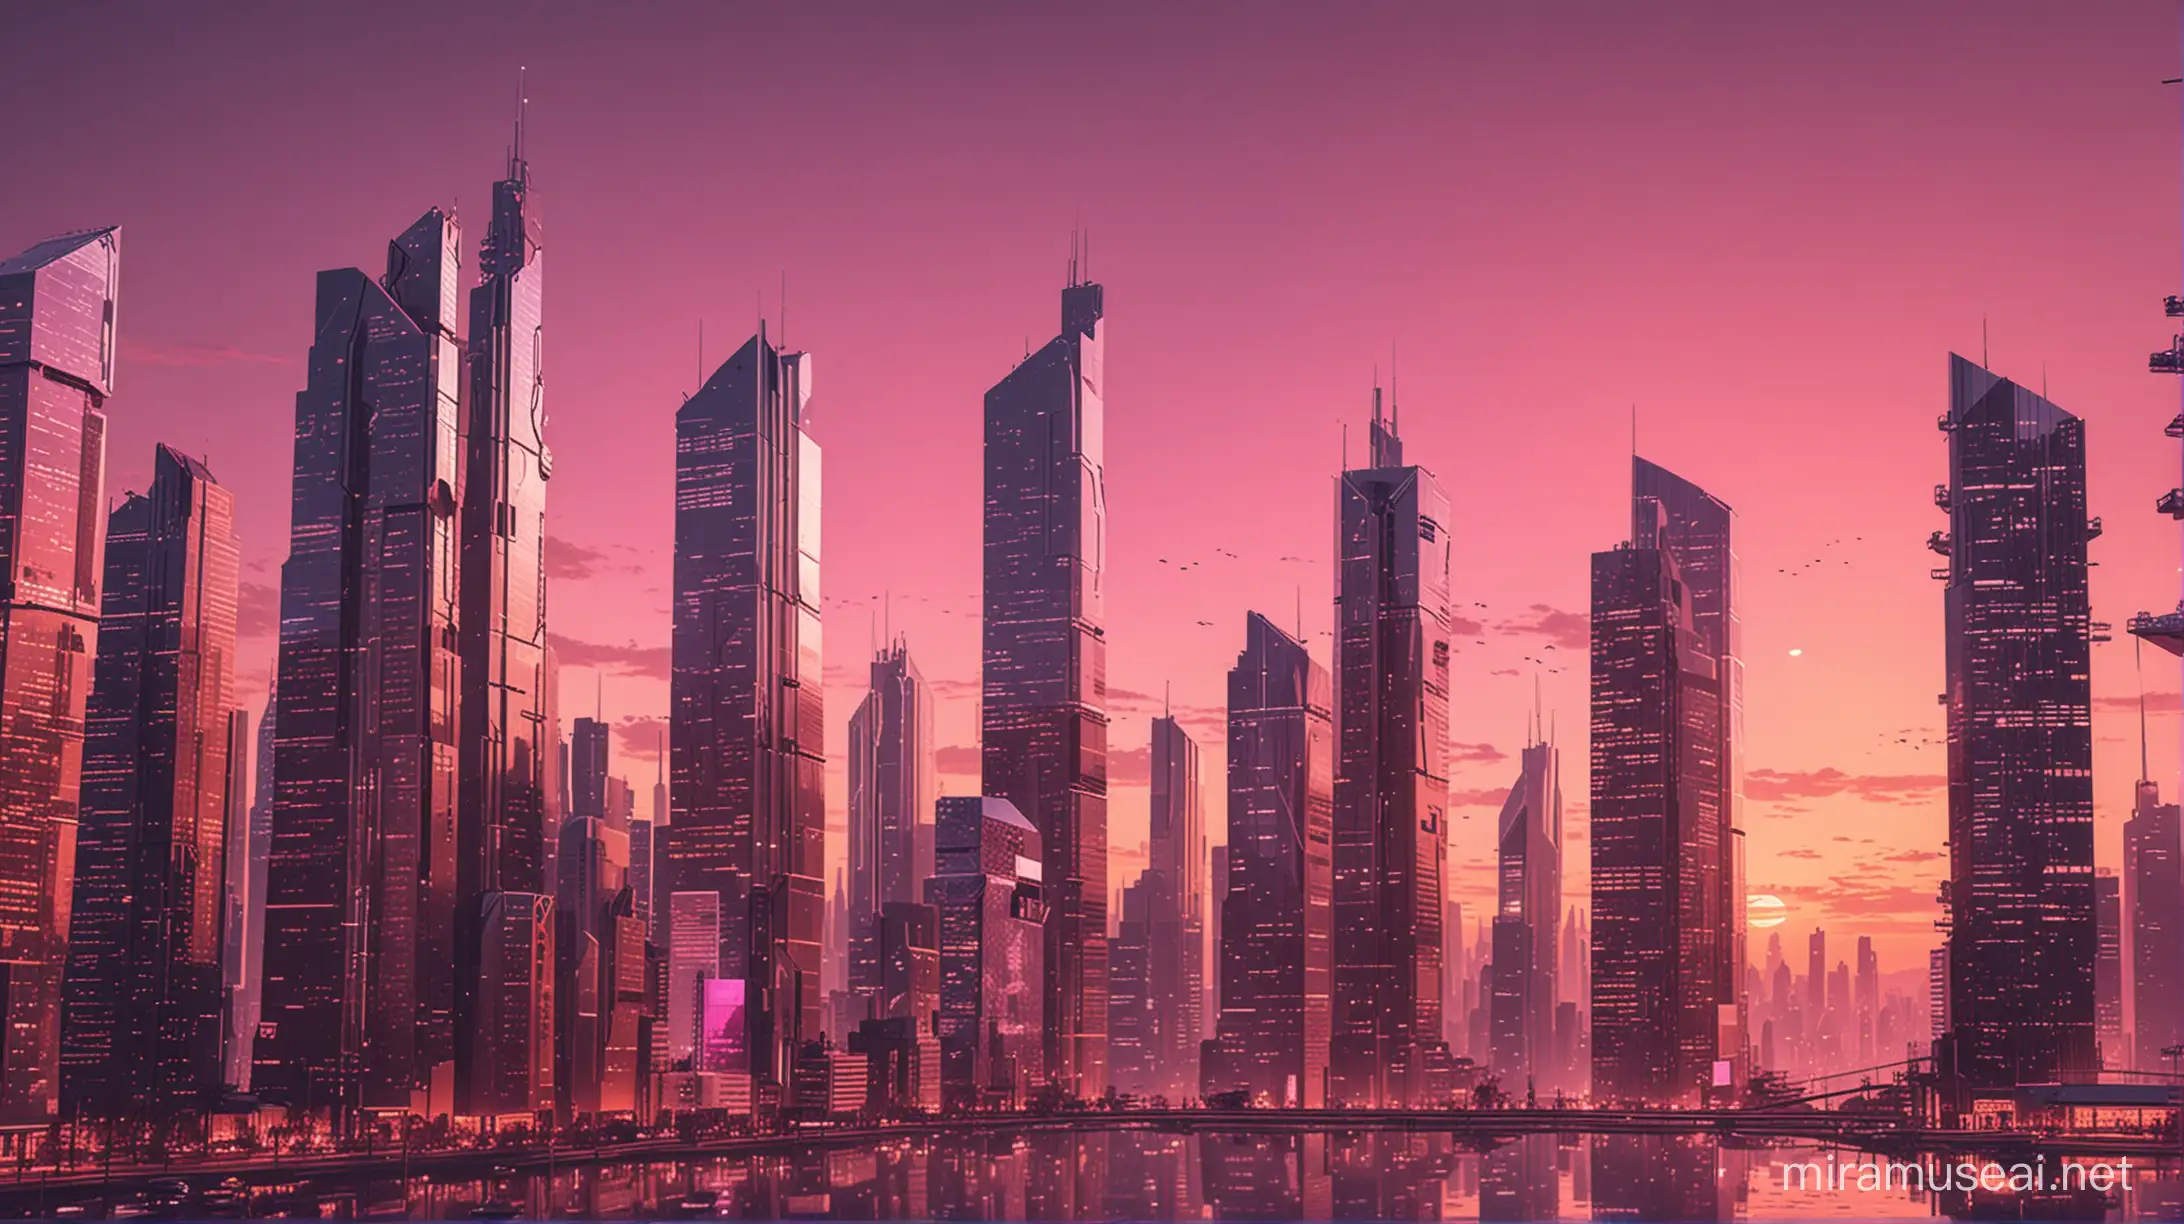 Futuristic Digital Cityscape Code Blocks and Gears Towers at Pink Sunset